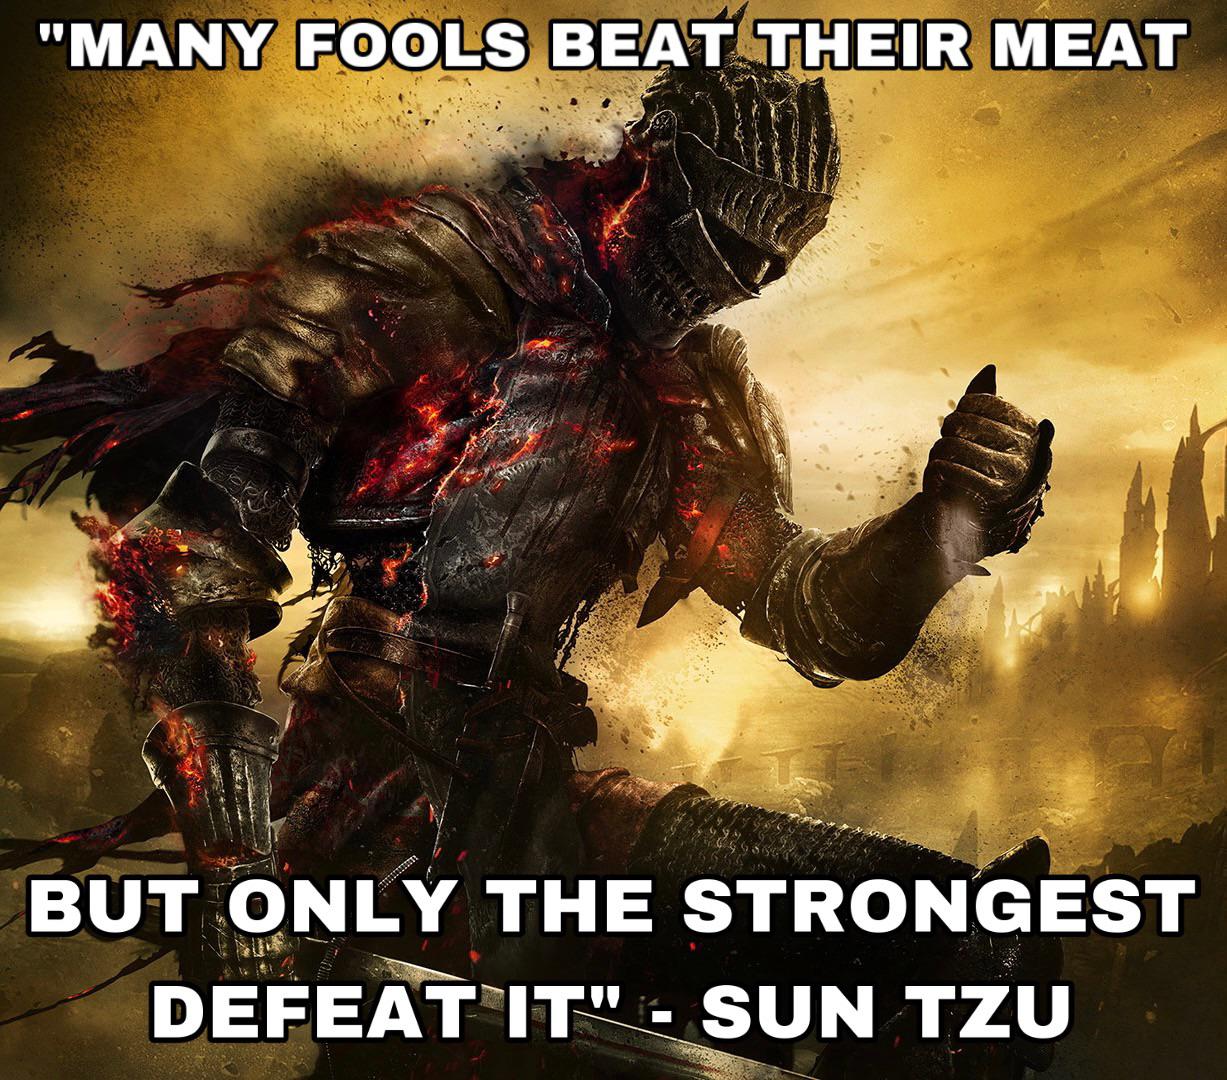 gaming memes - dark souls - "Many Fools Beat Their Meat But Only The Strongest Defeat It" Sun Tzu